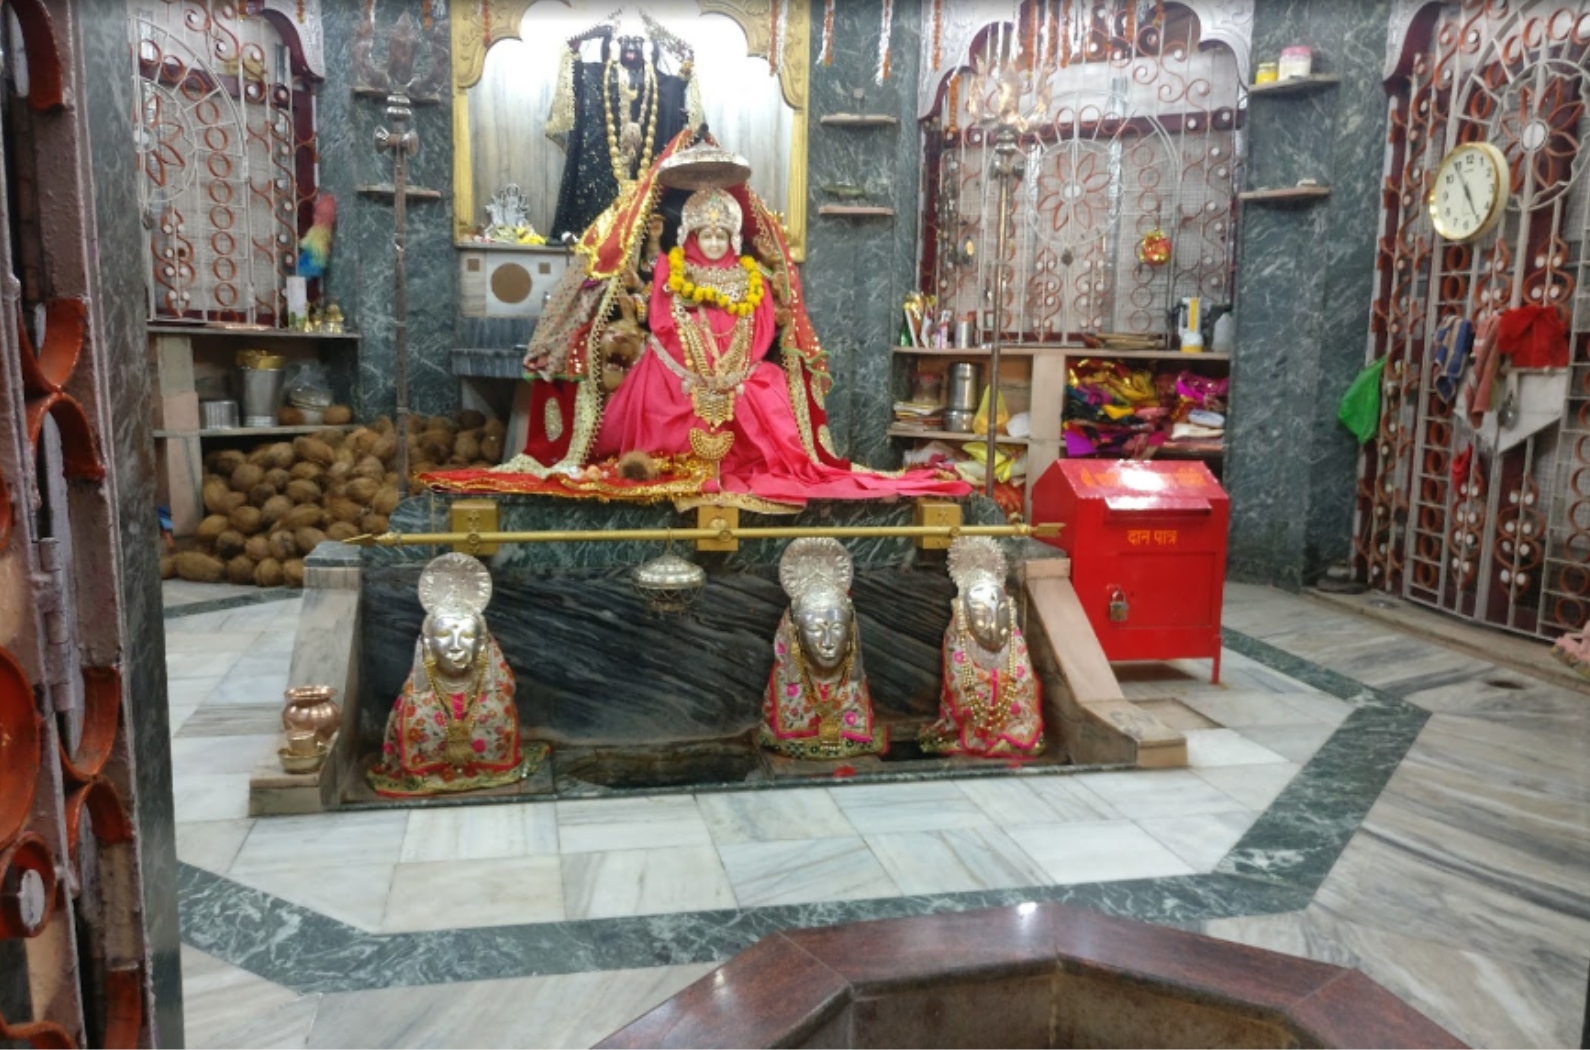 This ancient temple is known to get rid of evil spirits. Chandi pooja is the popular ritual of this temple. Many devotees come to perform Chandi pooja.